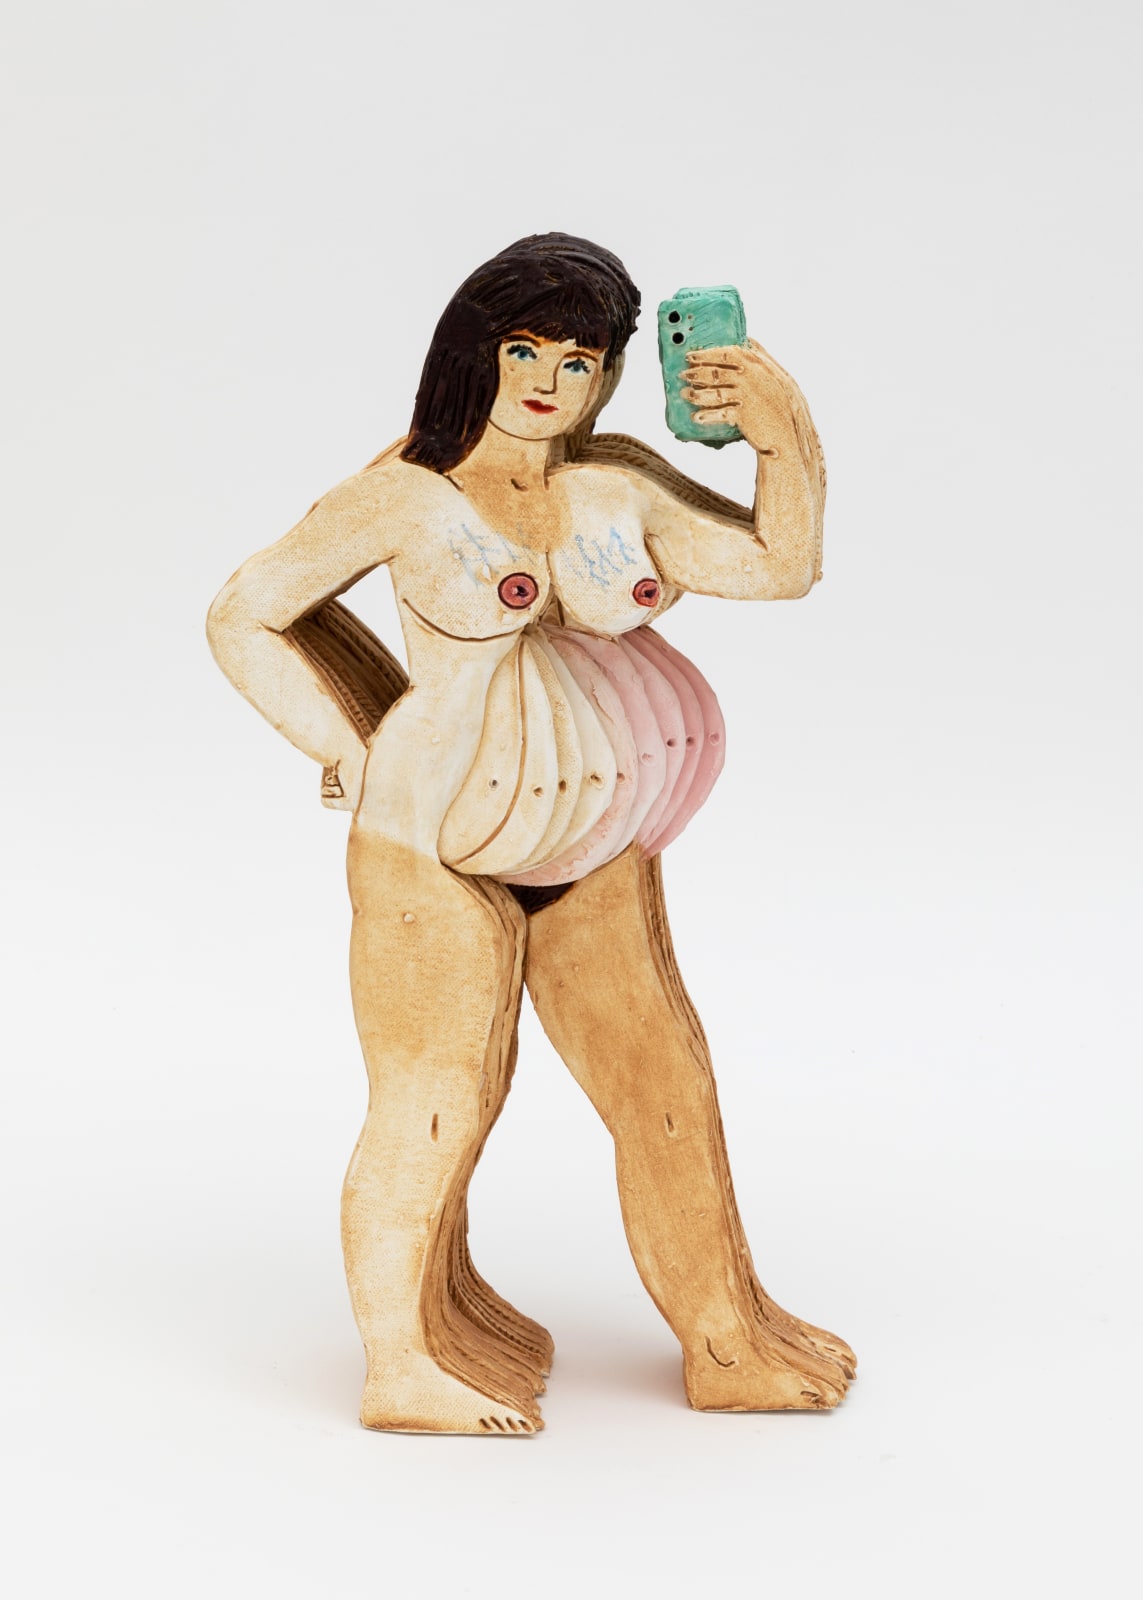 Ceramic sculpture of the artist naked and pregnant while holding her cell phone to take a selfie photo.  